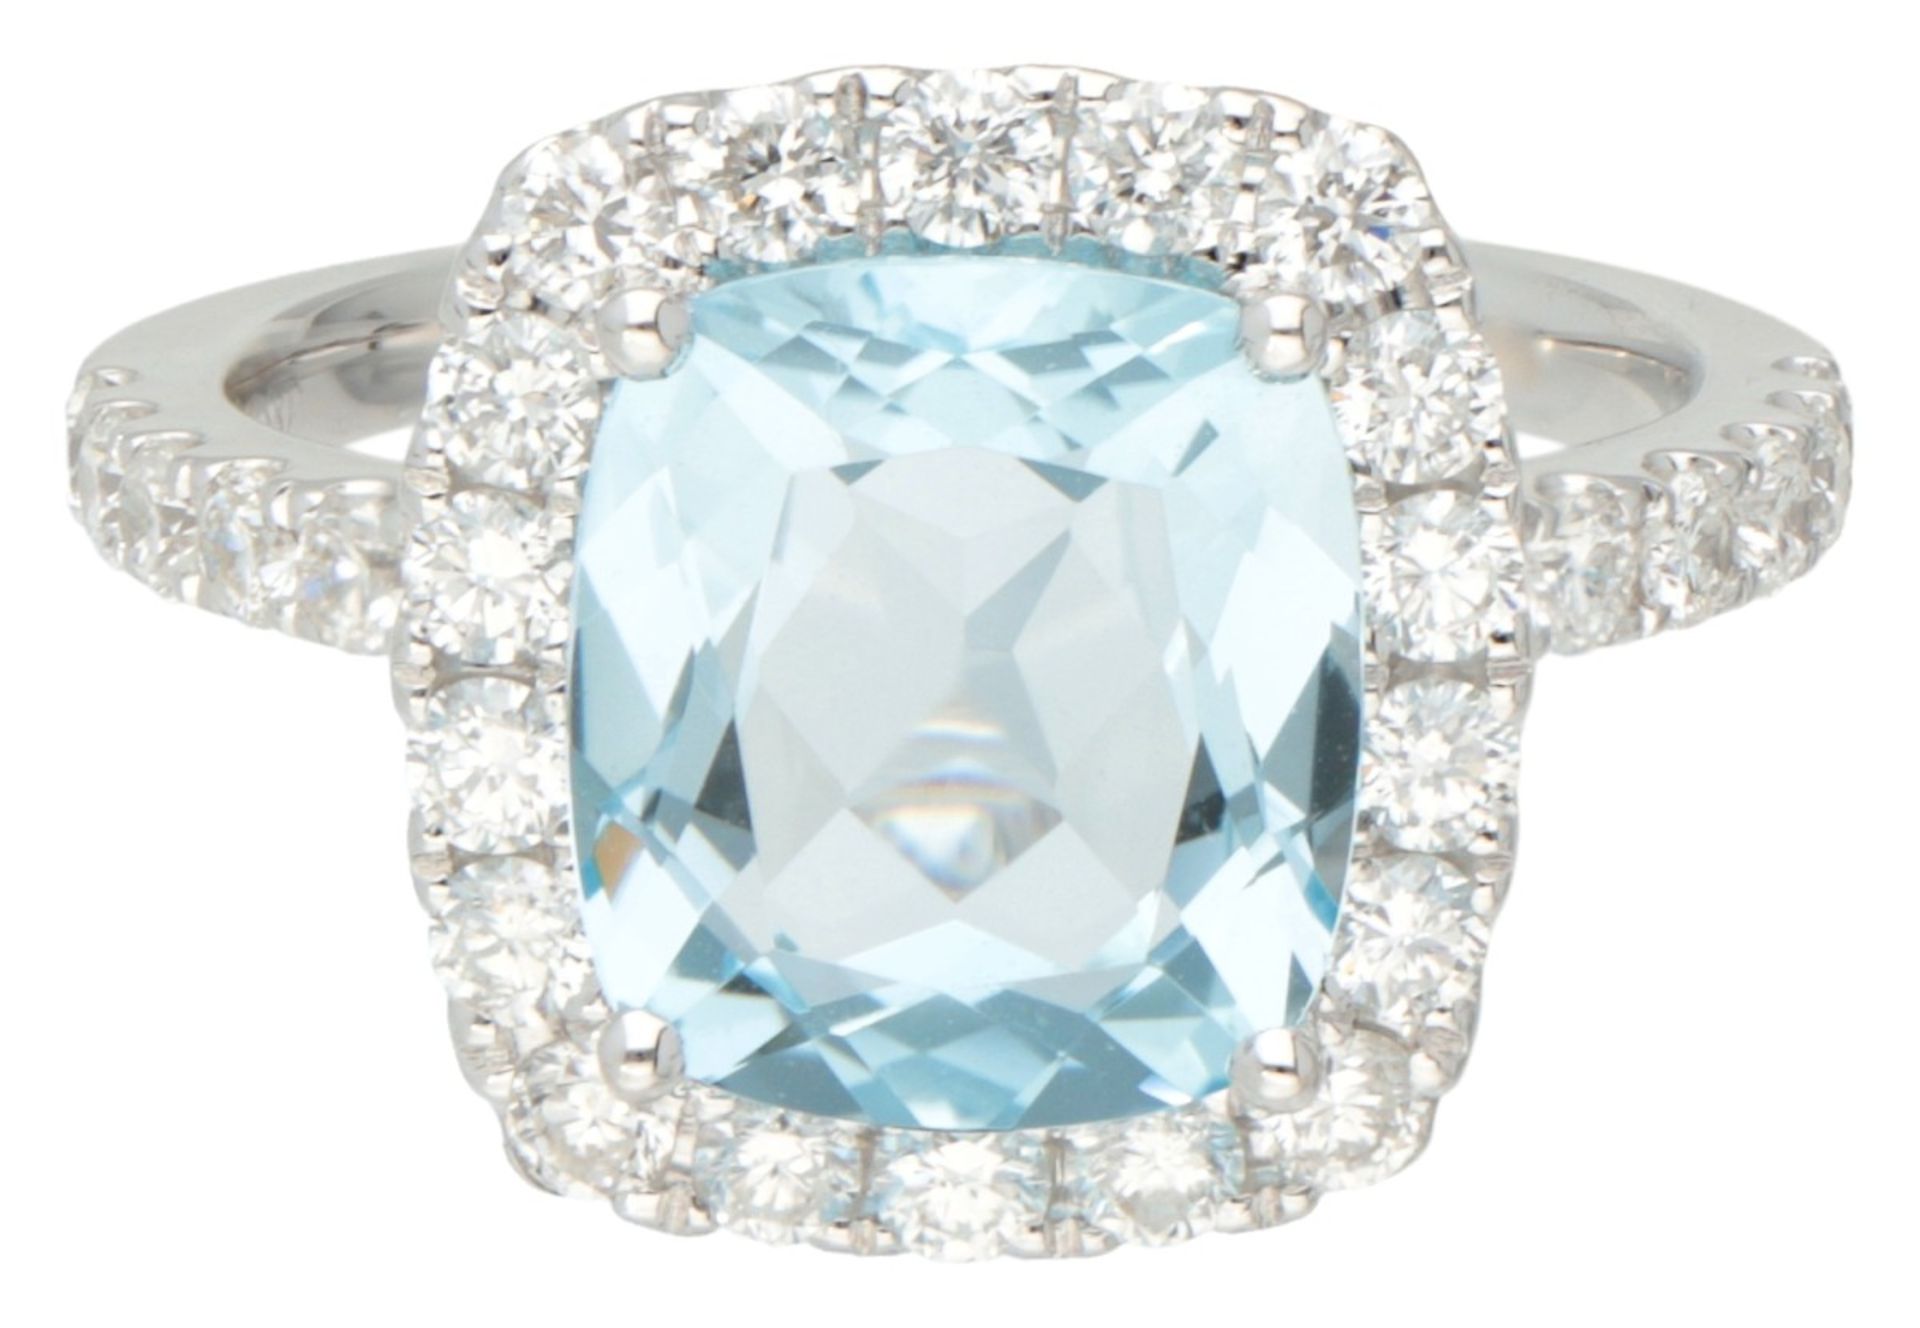 18K. White gold entourage ring set with approx. 3.53 ct. sky blue topaz and approx. 0.60 ct. diamond - Image 2 of 3